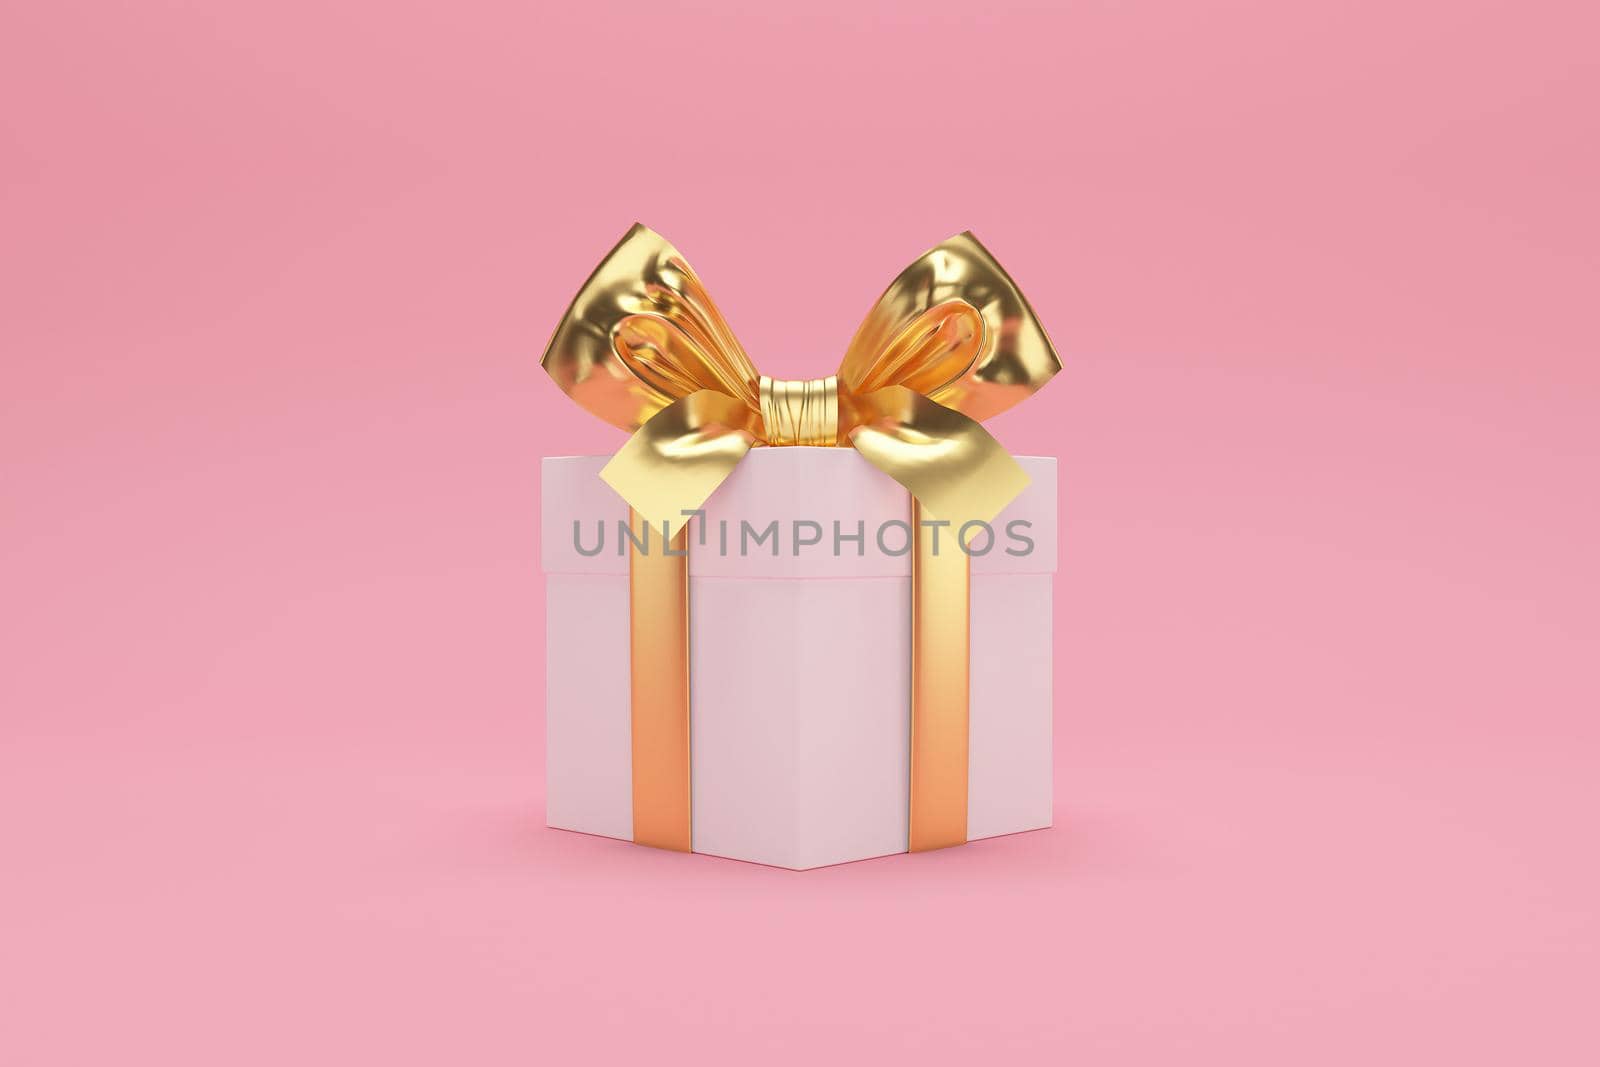 3d rendering Image of Jewish holiday Hanukkah with gif box on a pink background.